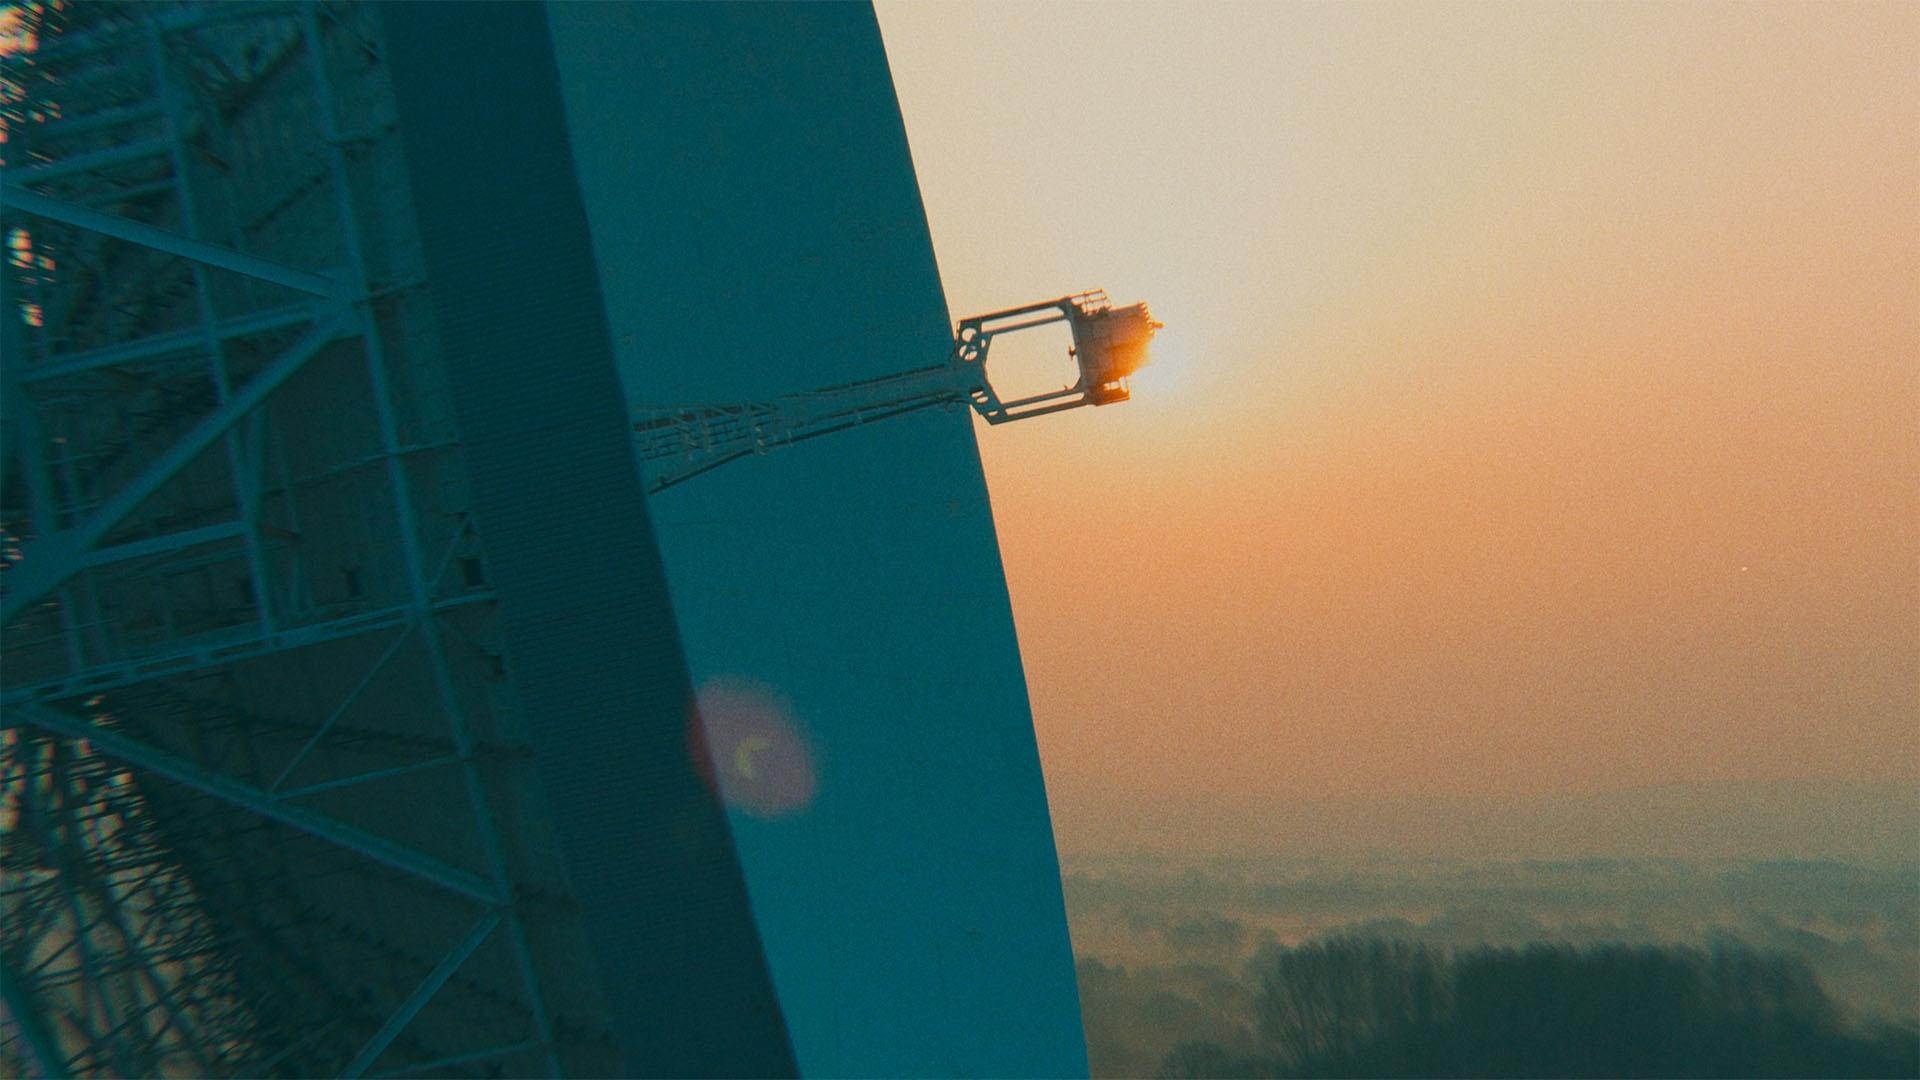 The sun rises behind the Lovell Telescope at Jodrell Bank Observatory.